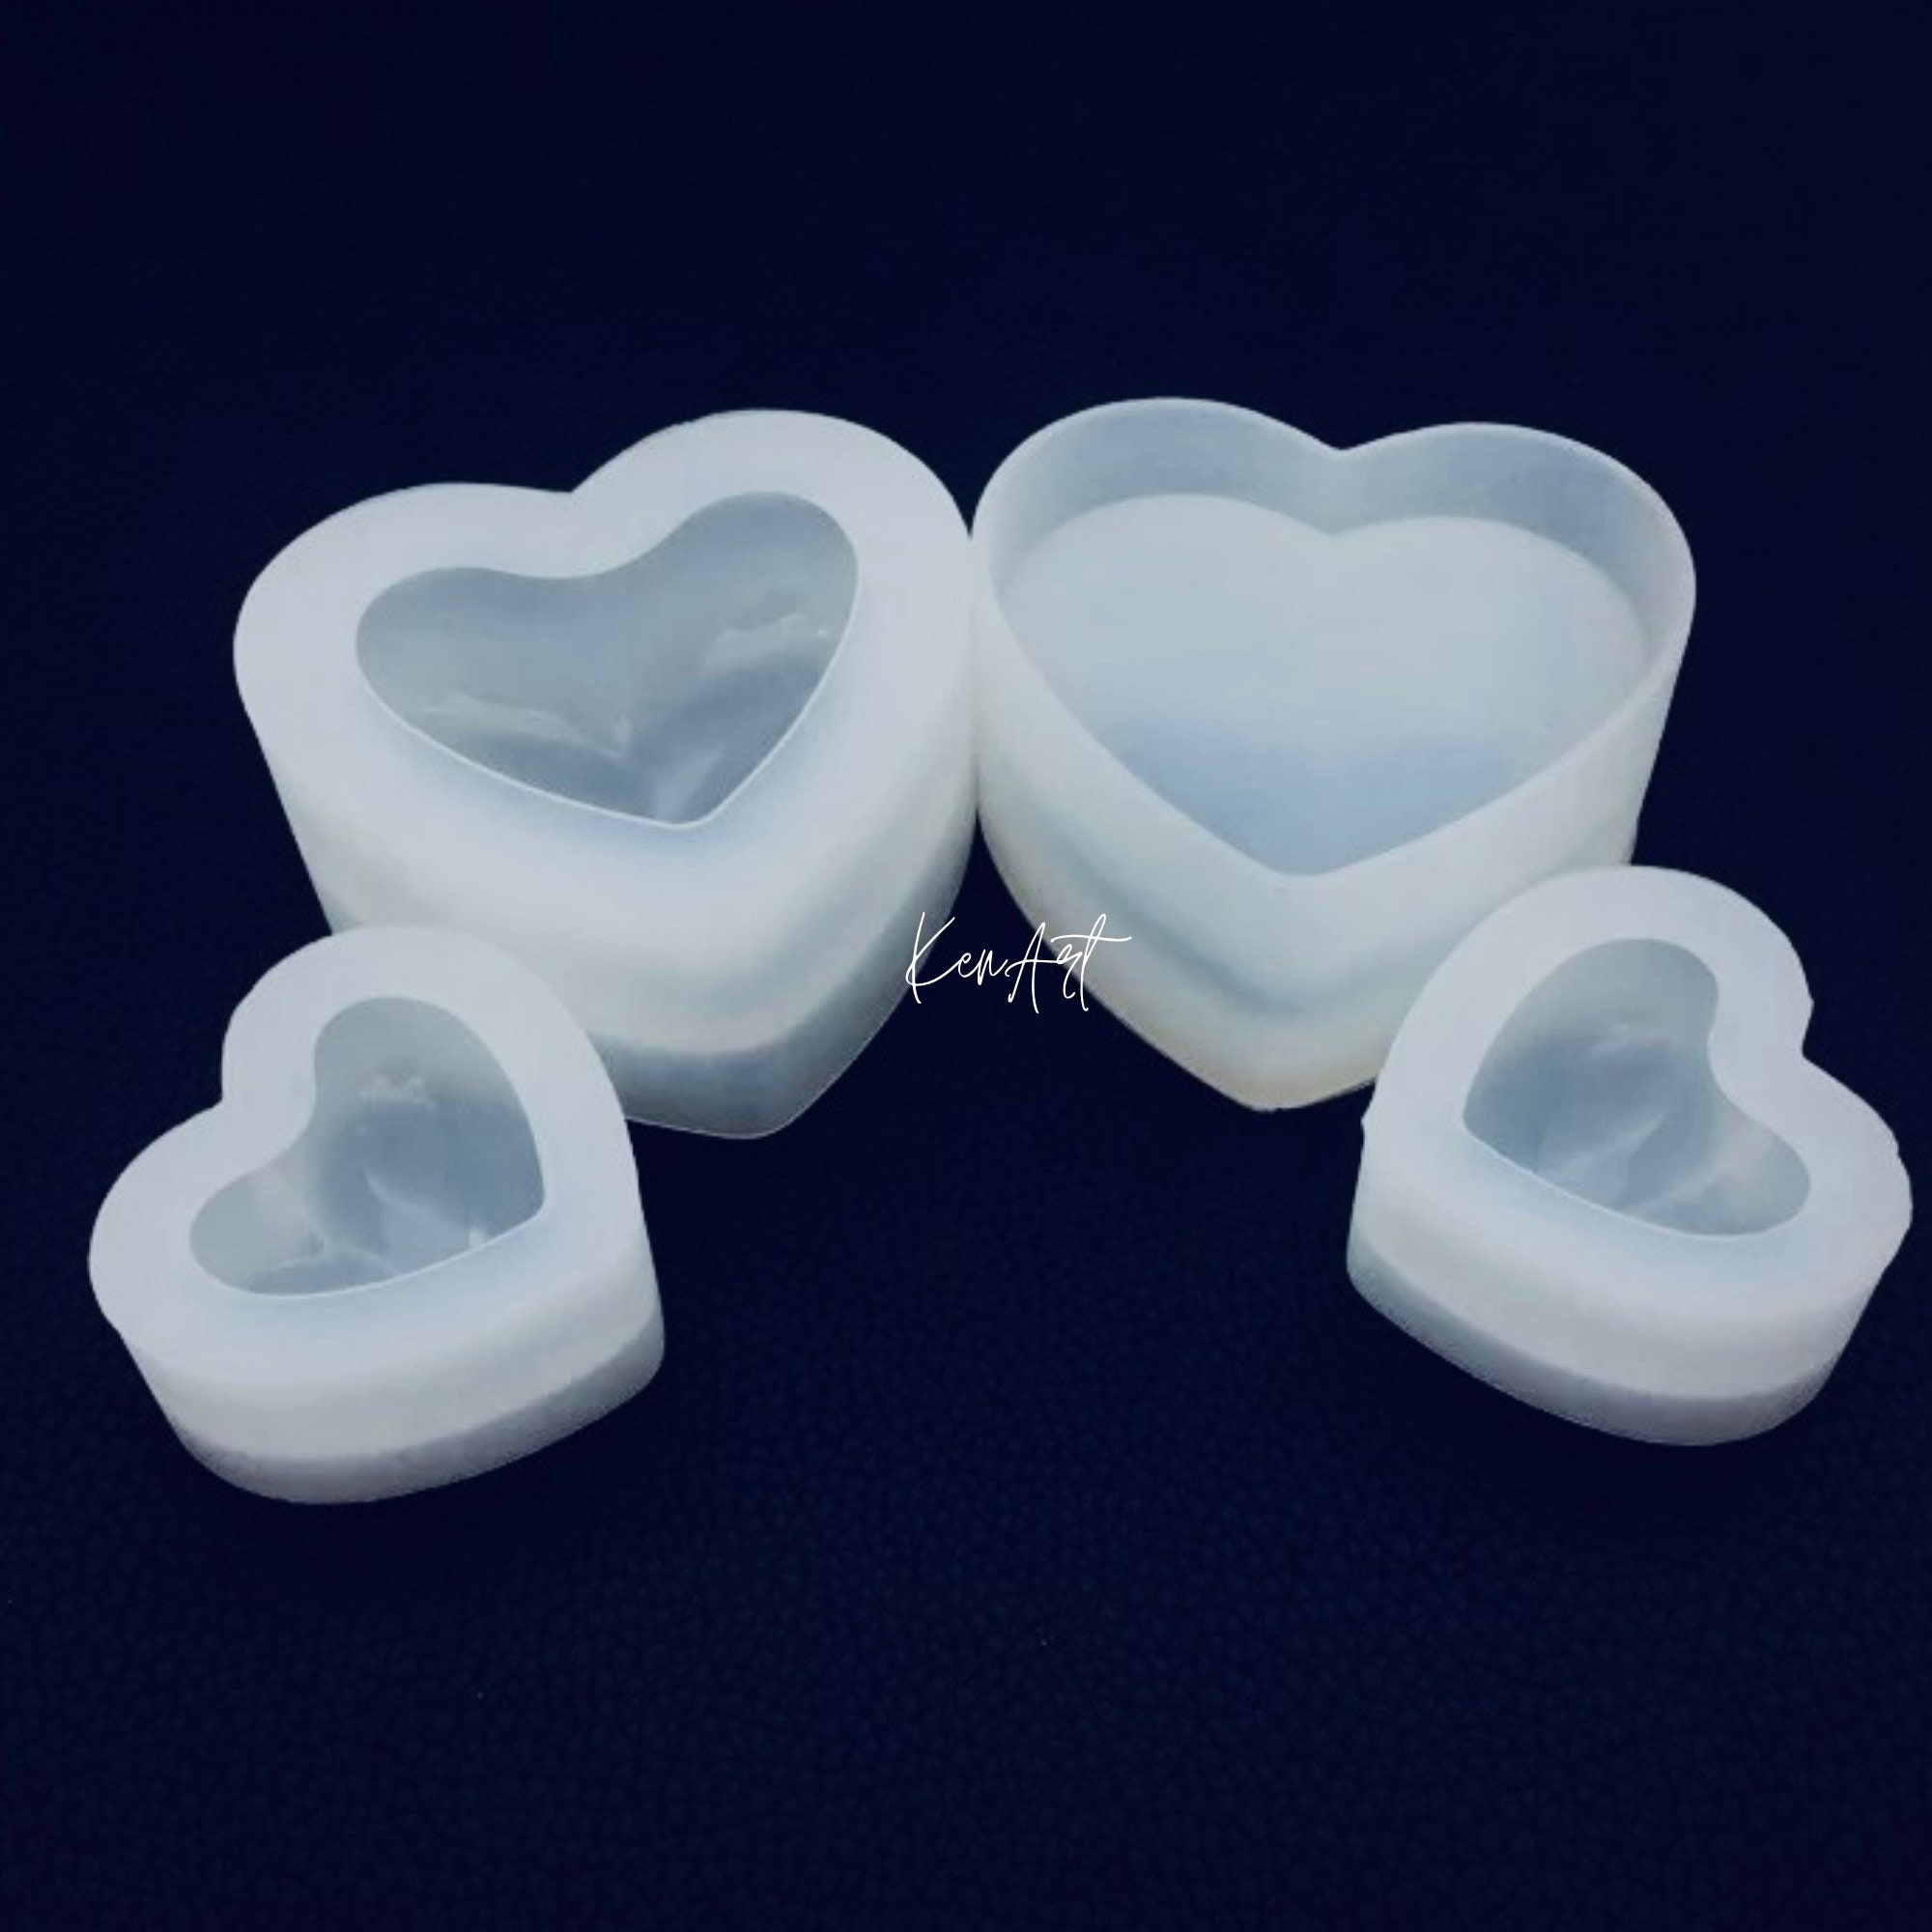  WANDIC 3pcs Love Heart Epoxy Resin Molds Silicone Handmade  Jewelry Cake Molds for Craft DIY, Fondant Decoration and Soap Ice Cube  Making